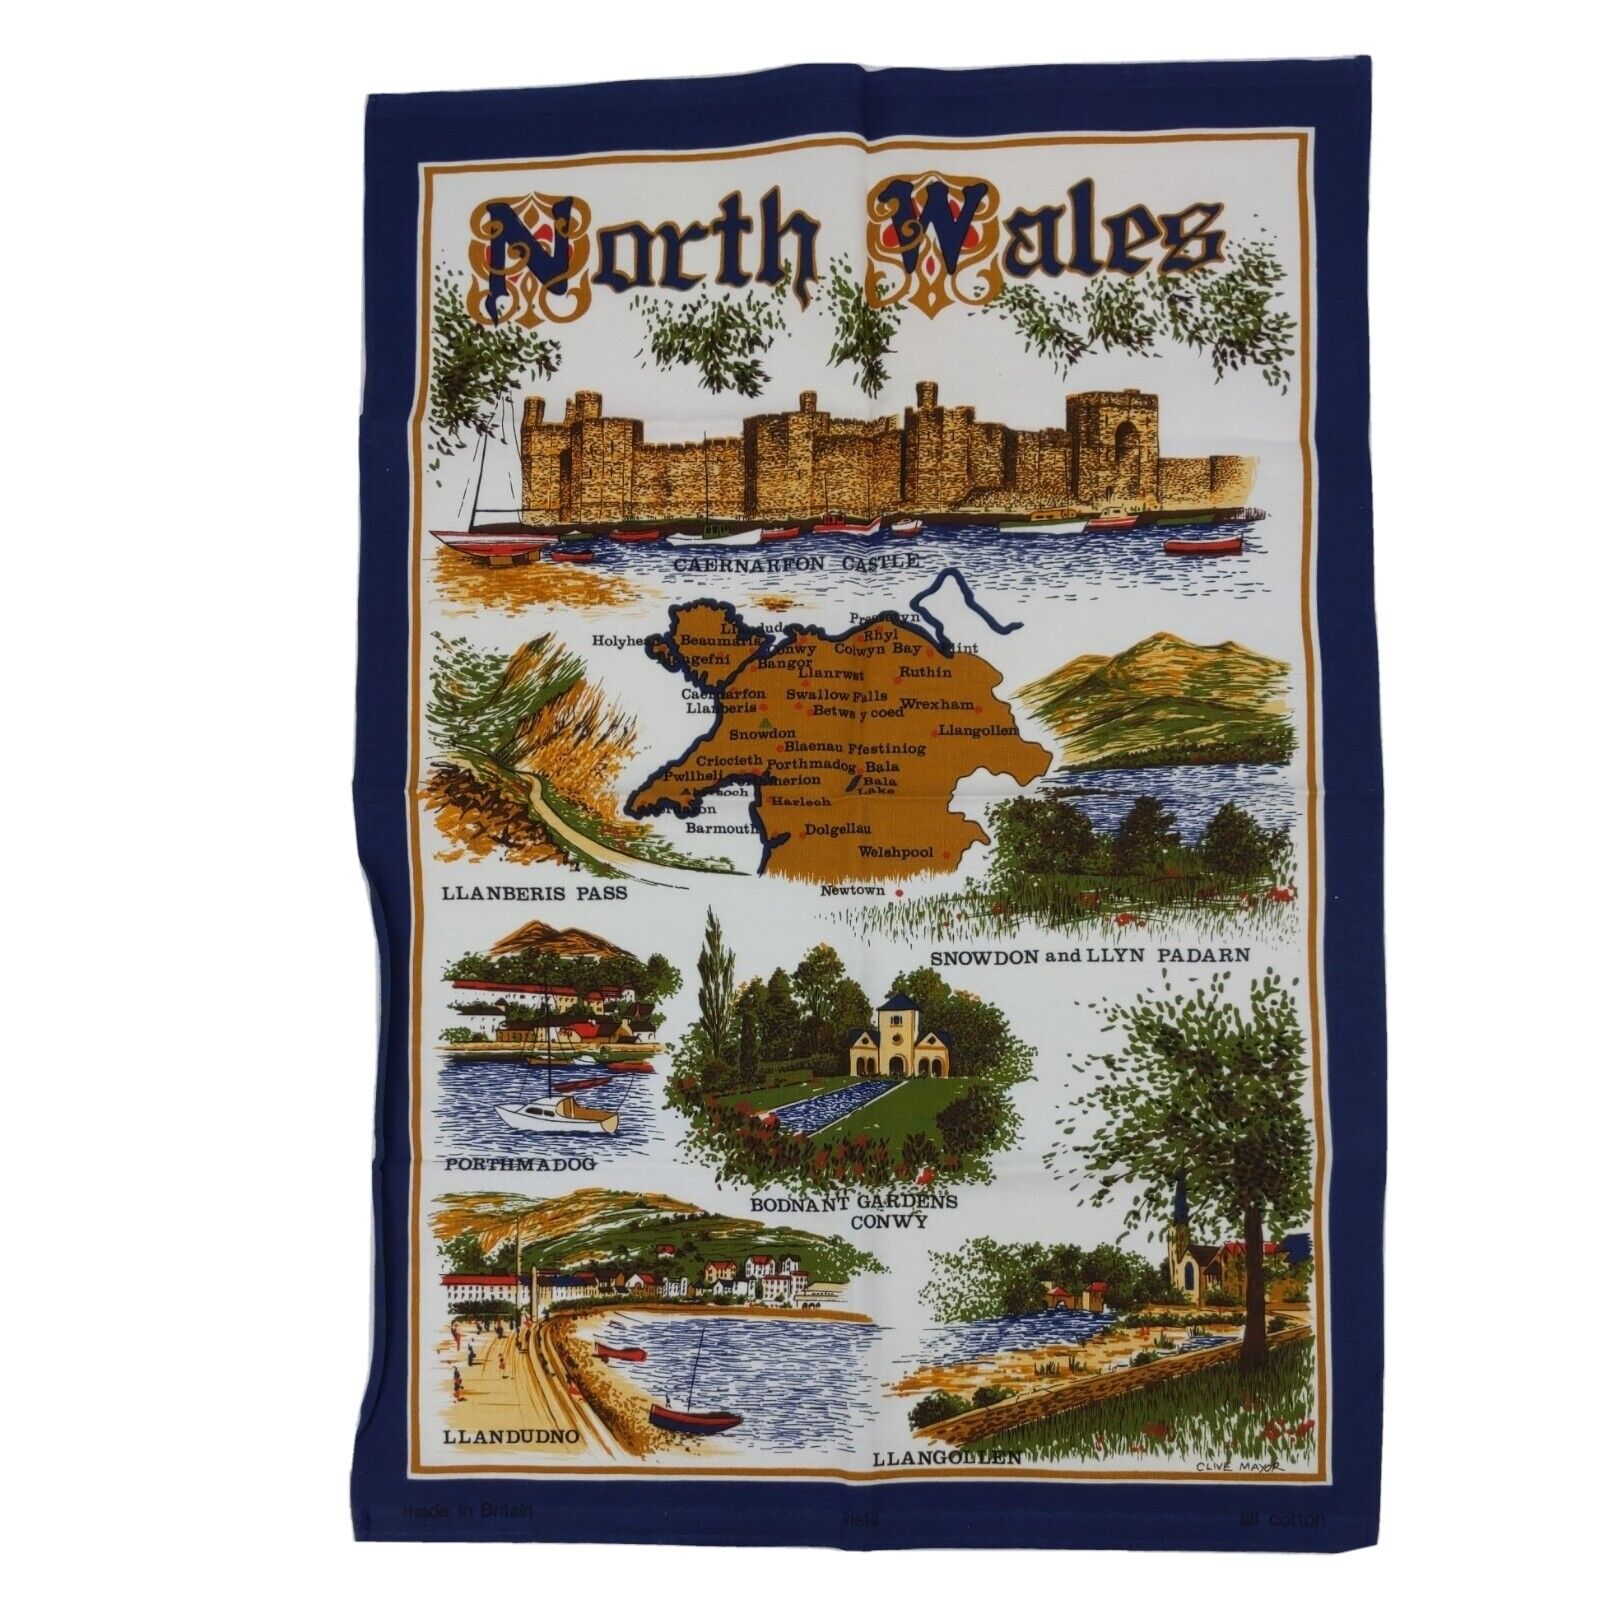 Vintage North Wales Map Tea Towel Dish Towel 100% Cotton New Without Tags NOS